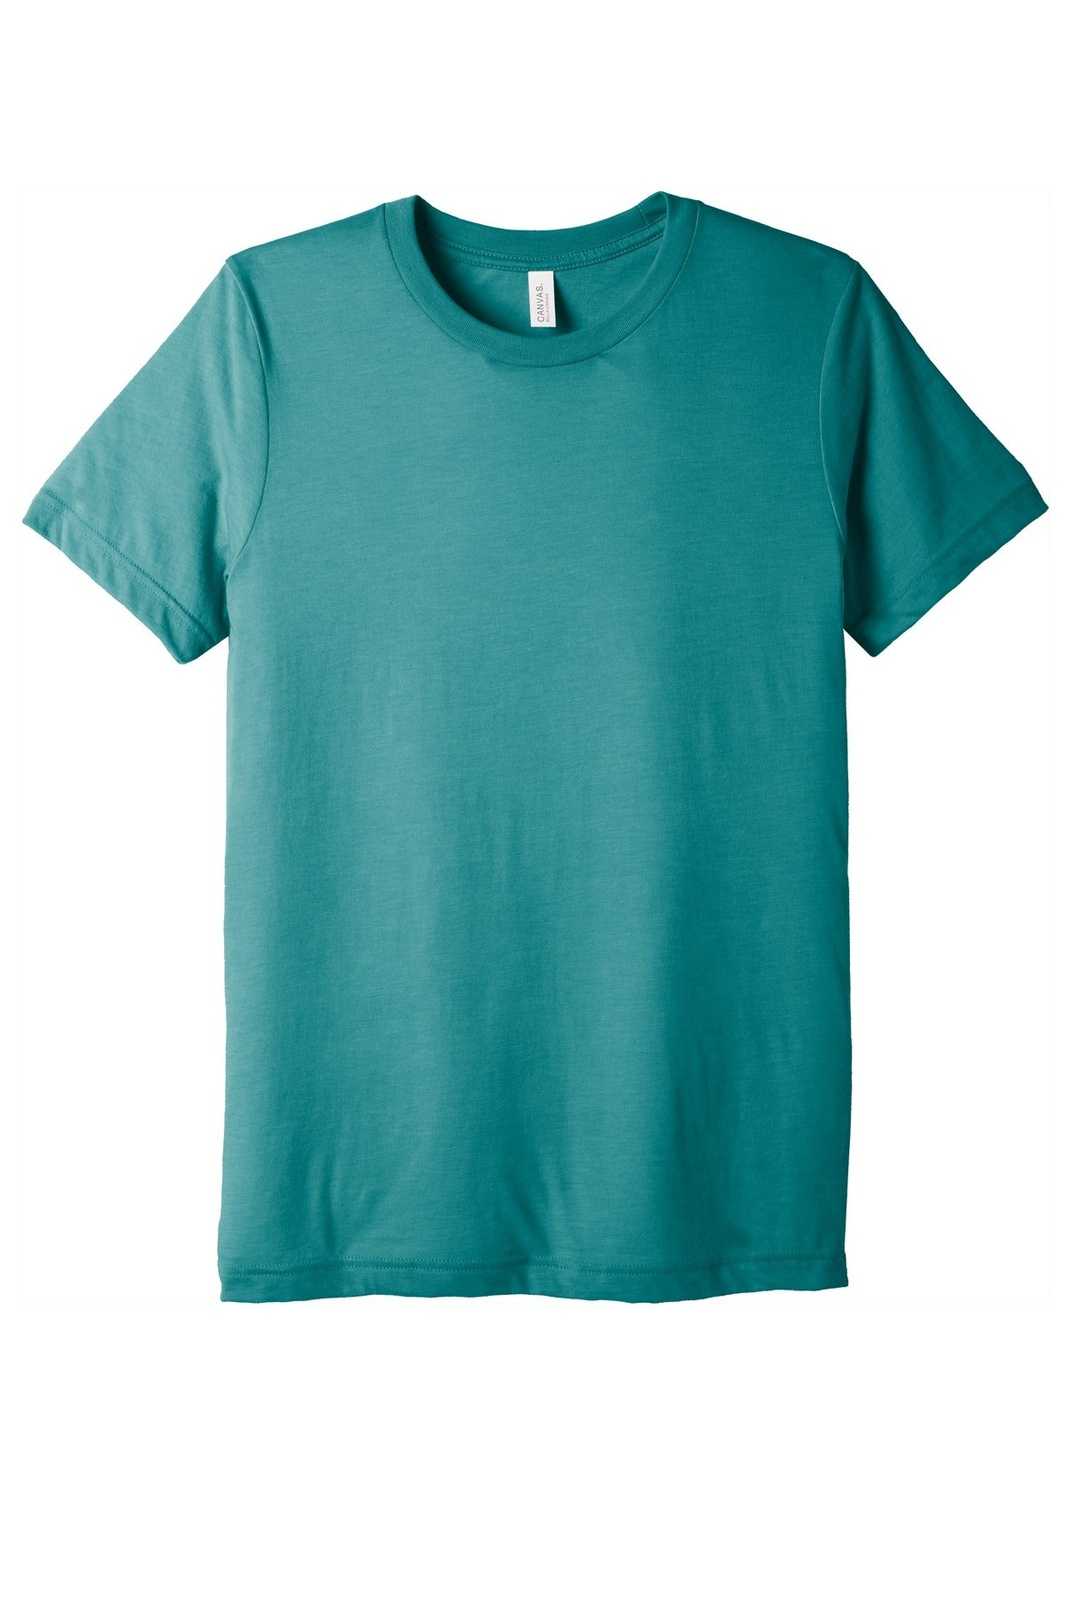 Bella + Canvas 3413 Unisex Triblend Short Sleeve Tee - Teal Triblend - HIT a Double